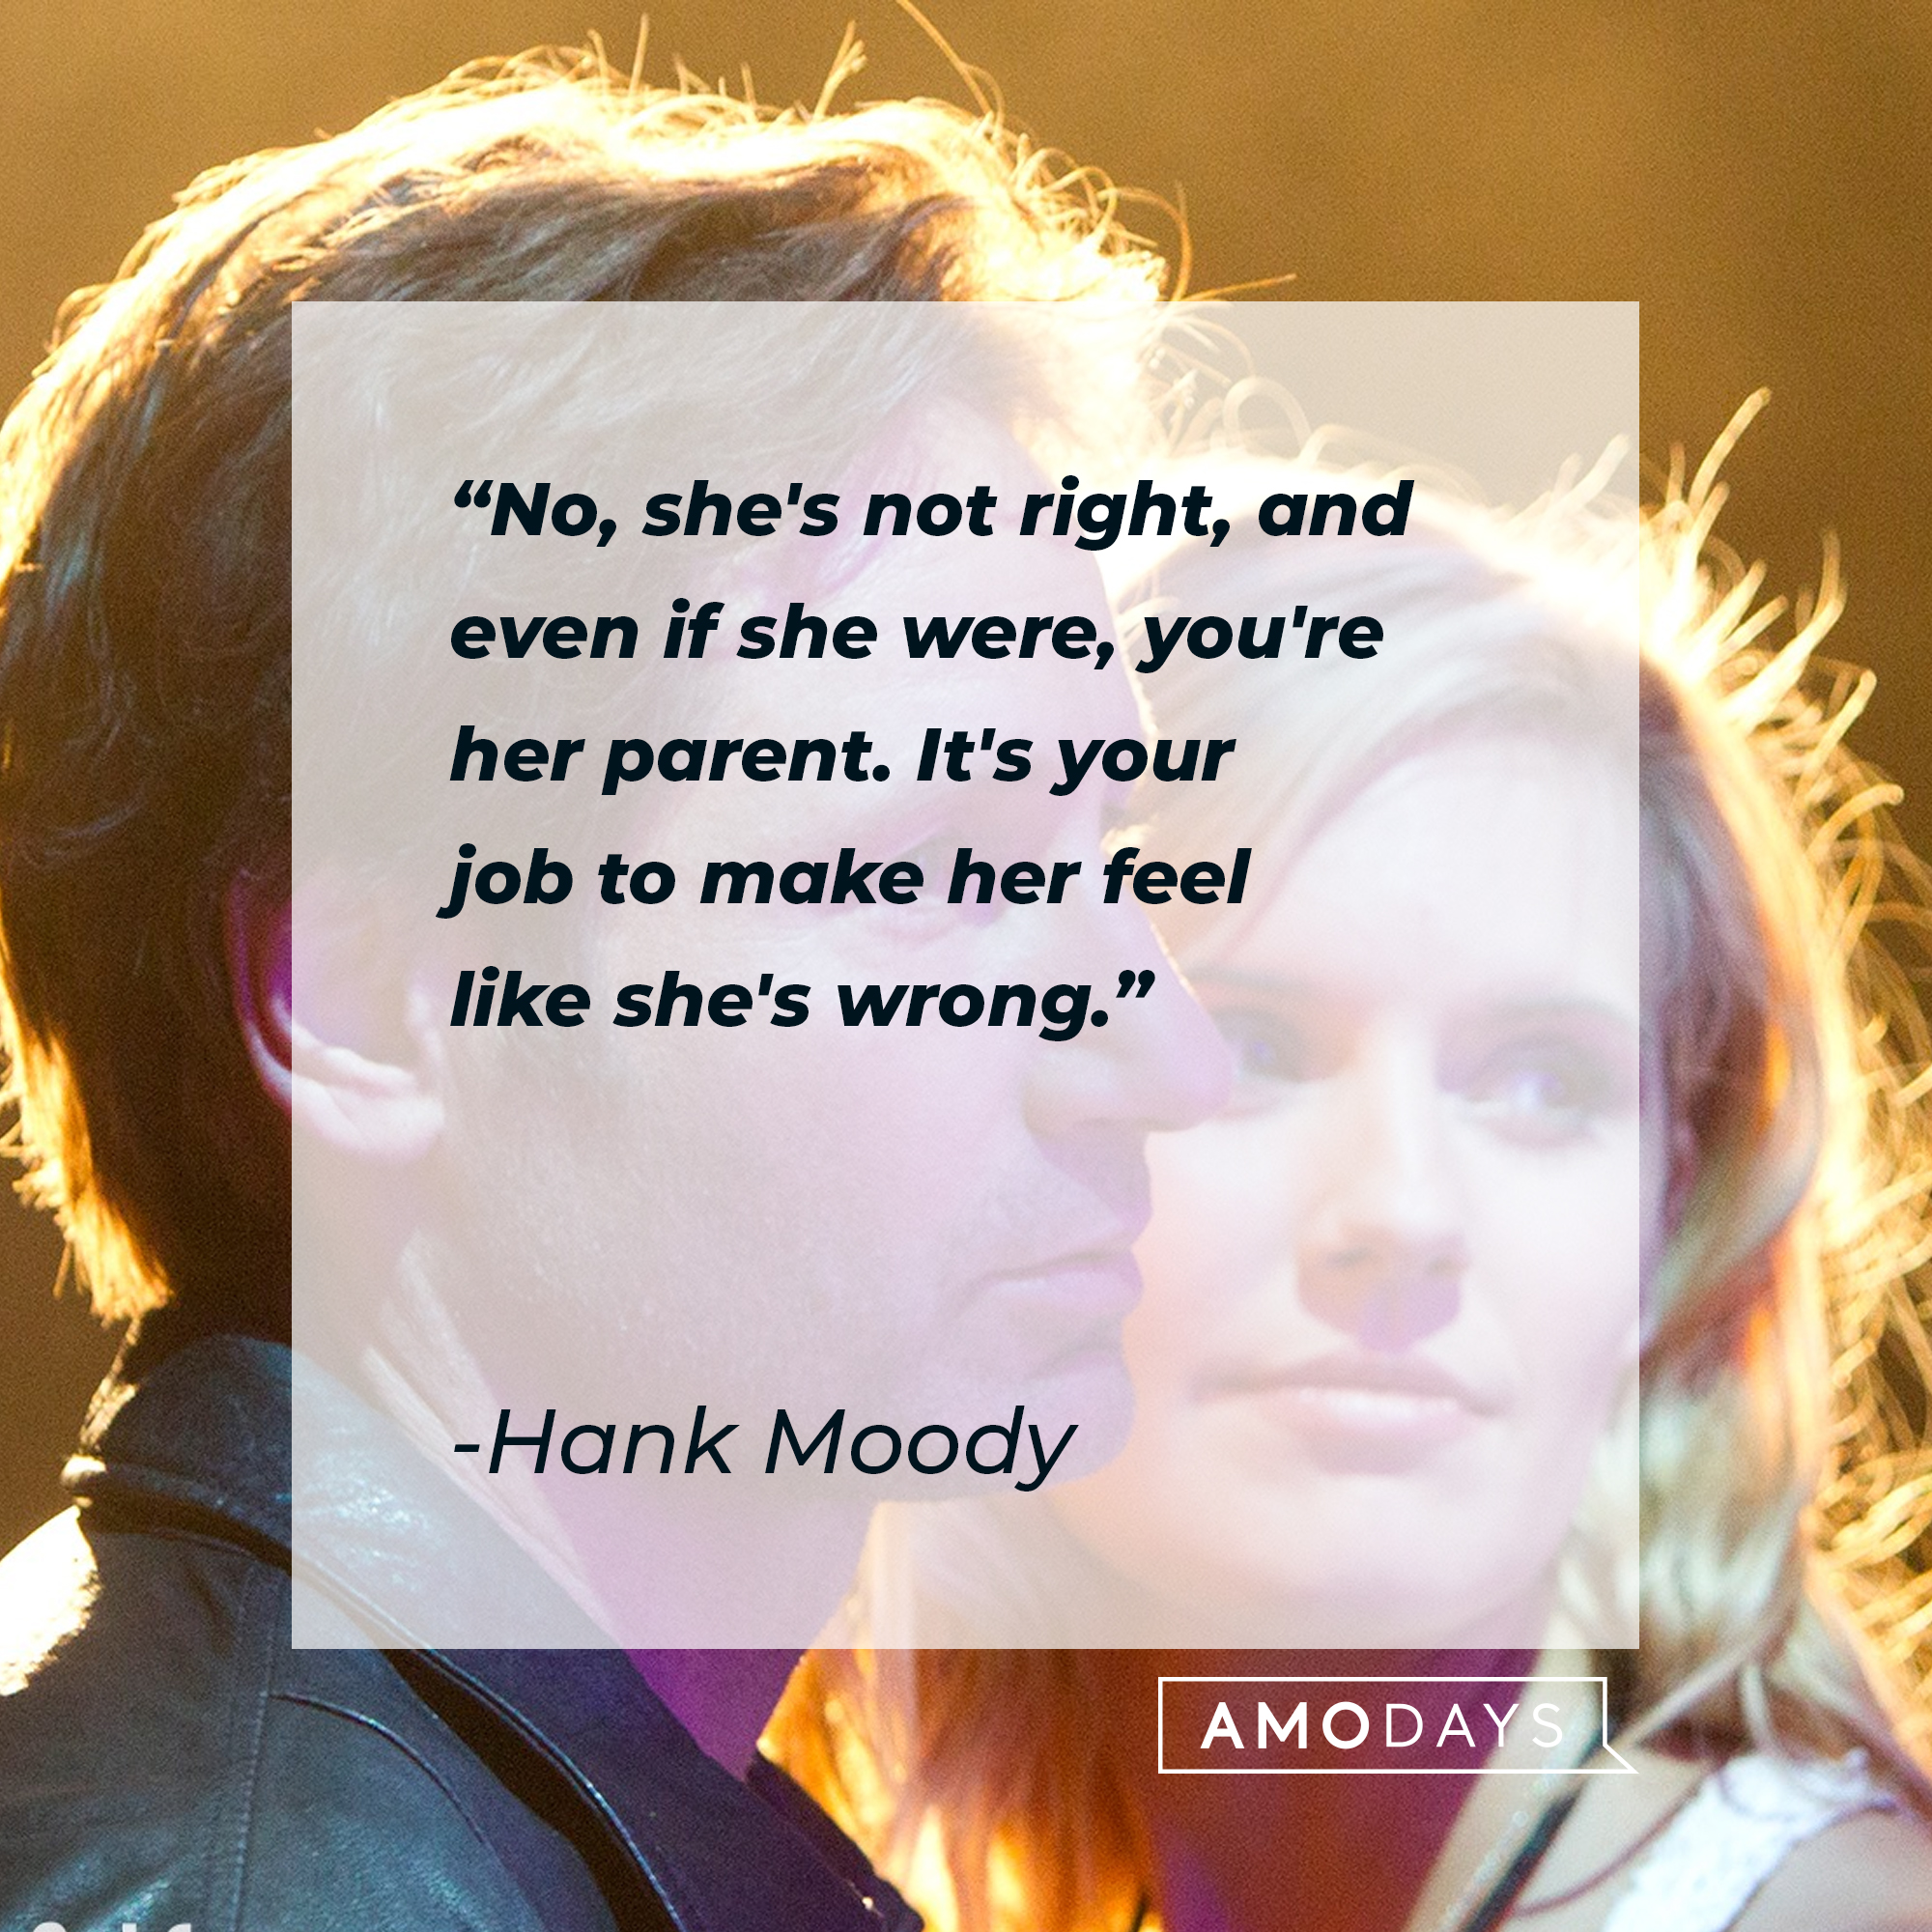 Hank Moody's quote: No, she's not right, and even if she were, you're her parent. It's your job to make her feel like she's wrong." | Image: AmoDays